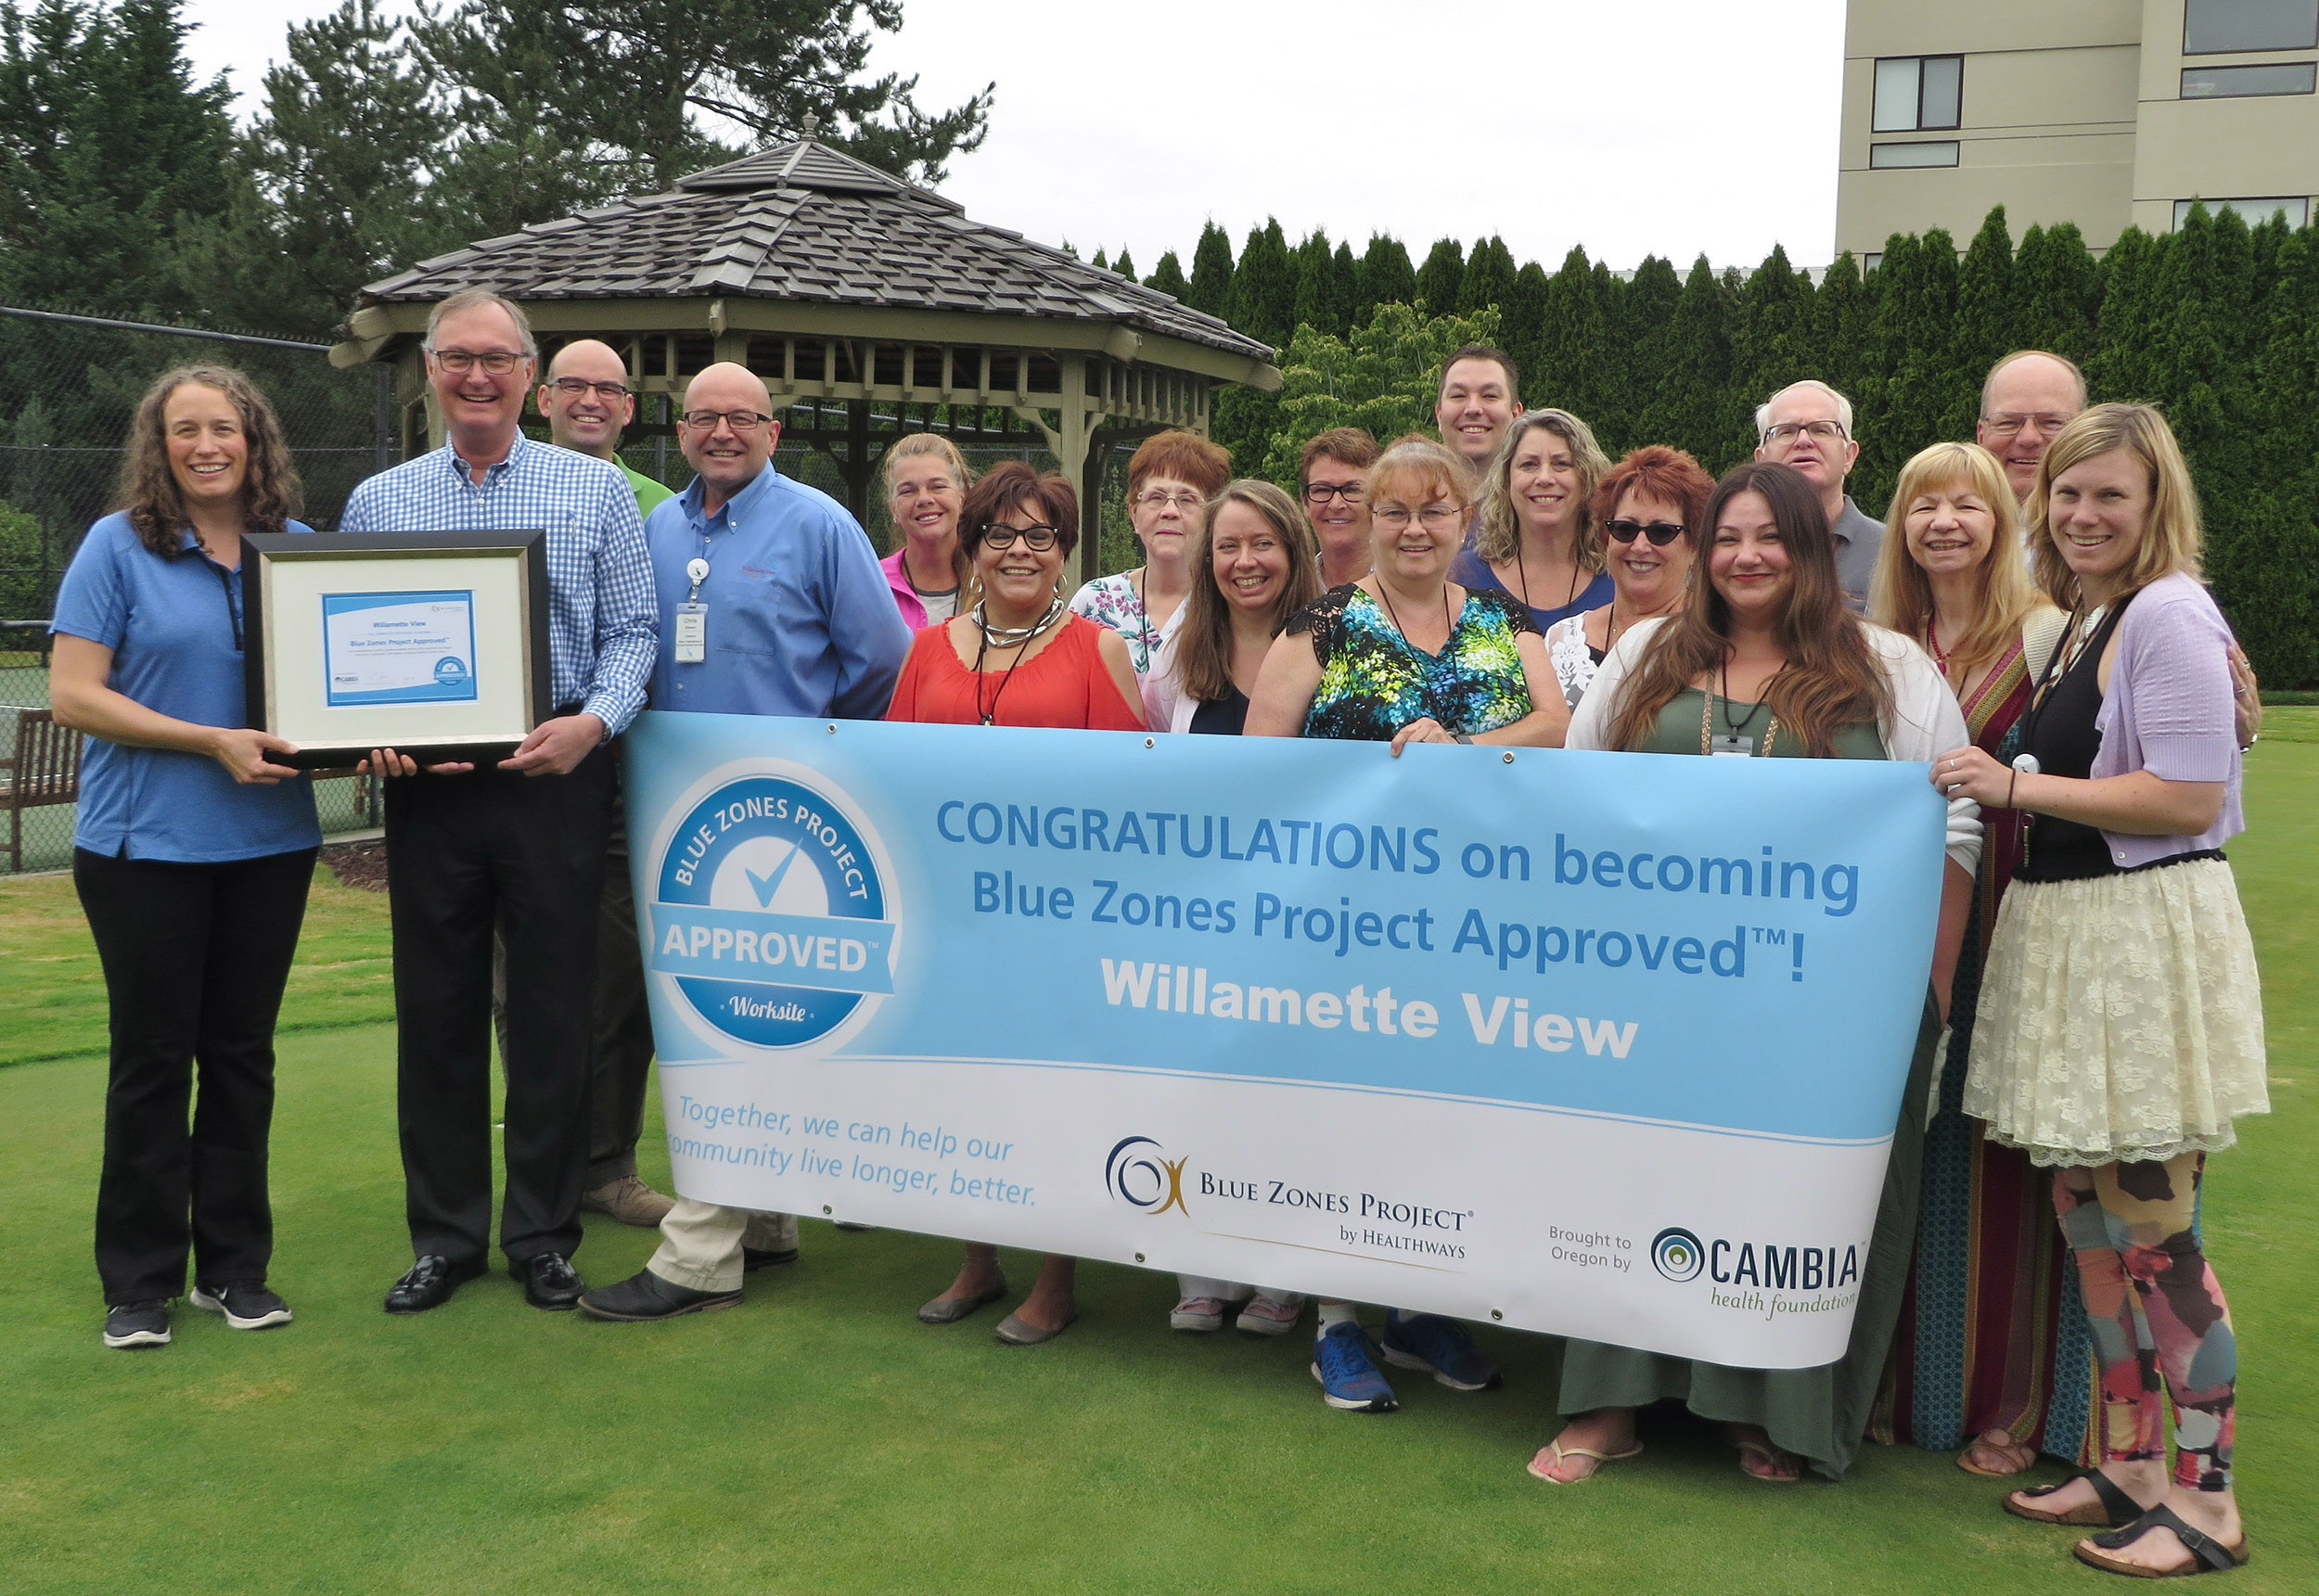 A group of Willamette View staff with a banner in front of them and a plaque signifying becoming a Blue Zone project